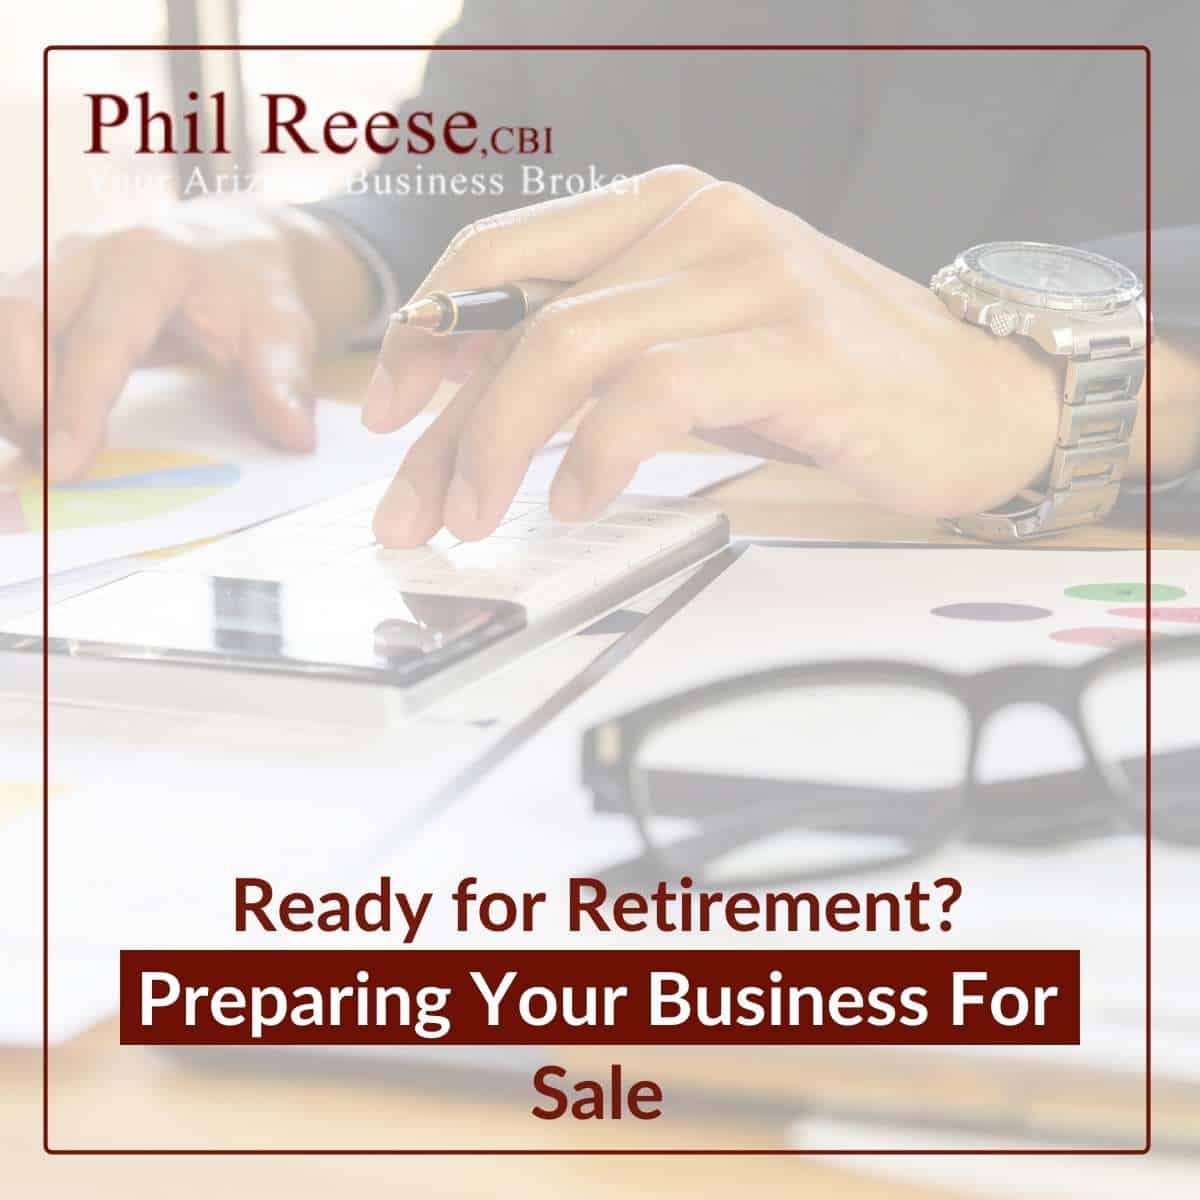 Ready for Retirement? Preparing Your Business For Sale